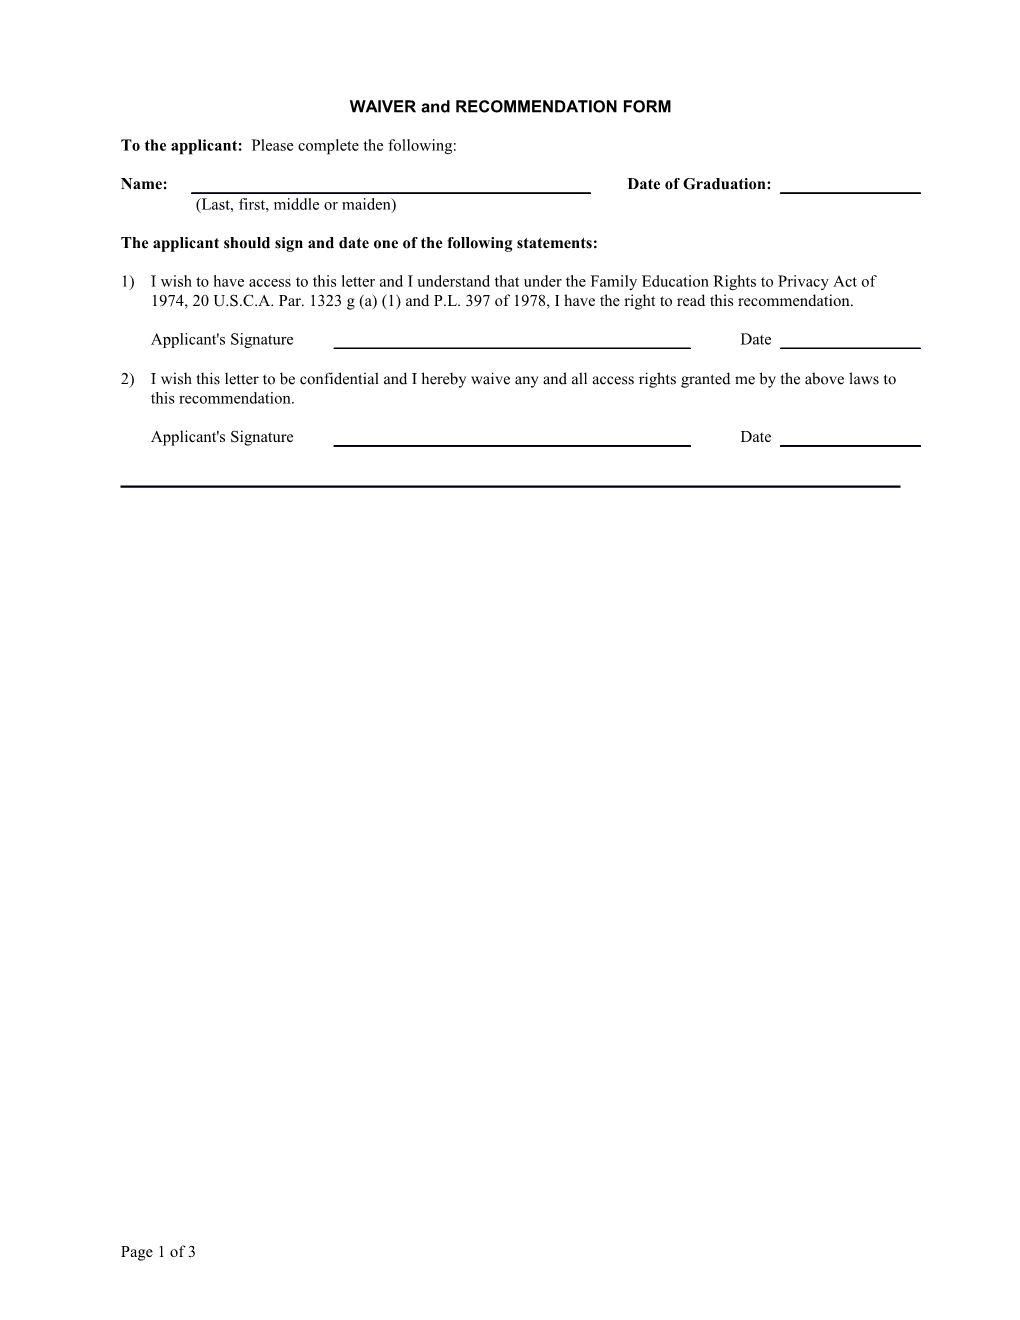 Waiver and Recommendation Form